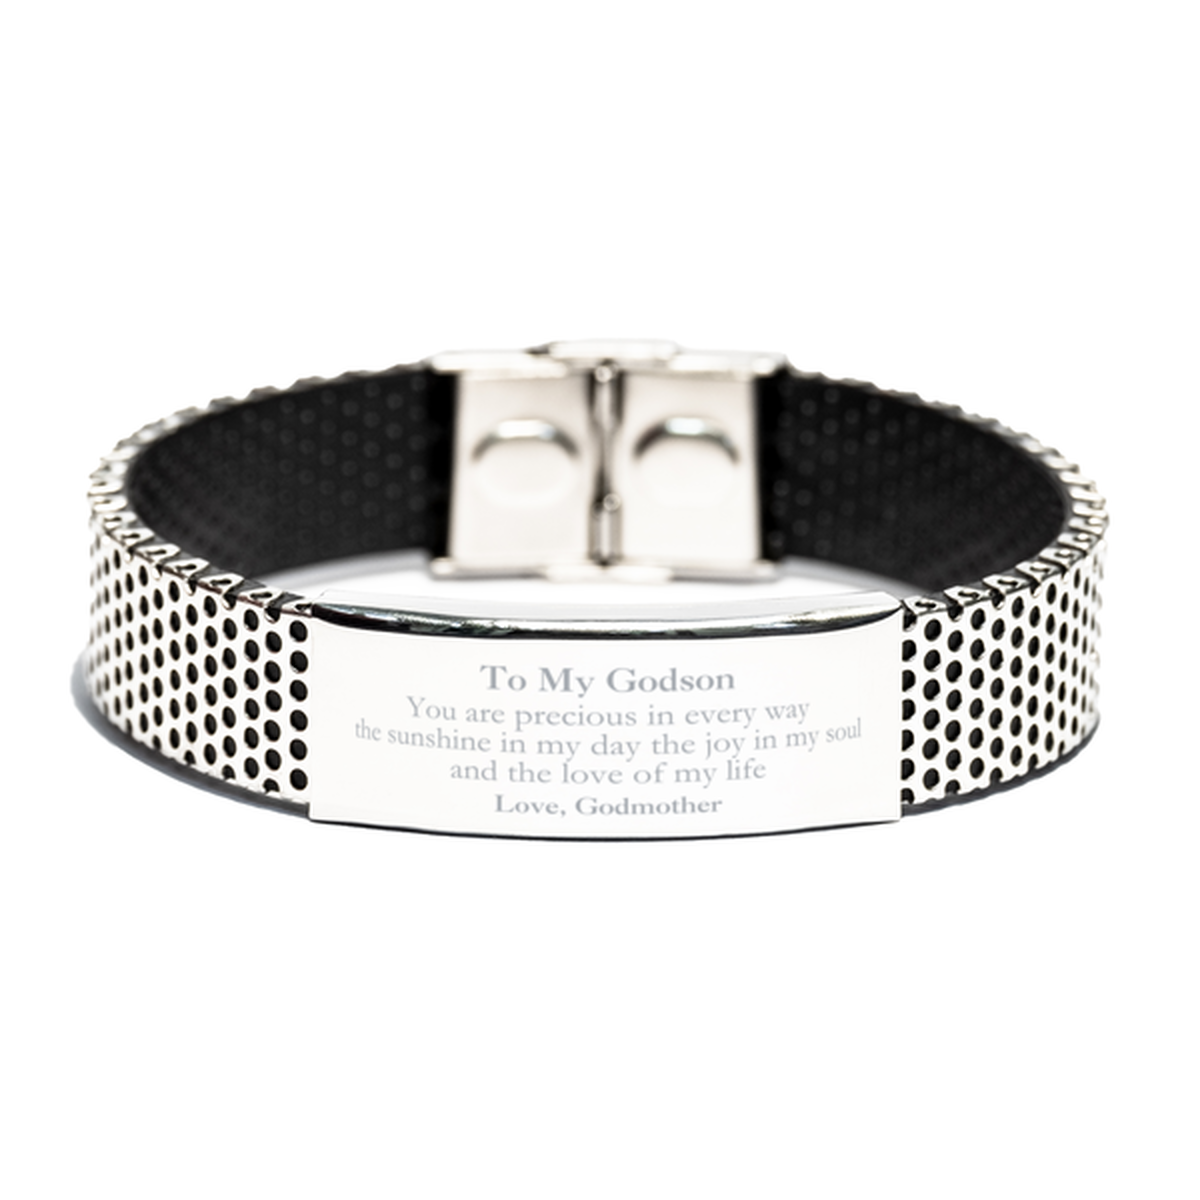 Graduation Gifts for Godson Stainless Steel Bracelet Present from Godmother, Christmas Godson Birthday Gifts Godson You are precious in every way the sunshine in my day. Love, Godmother